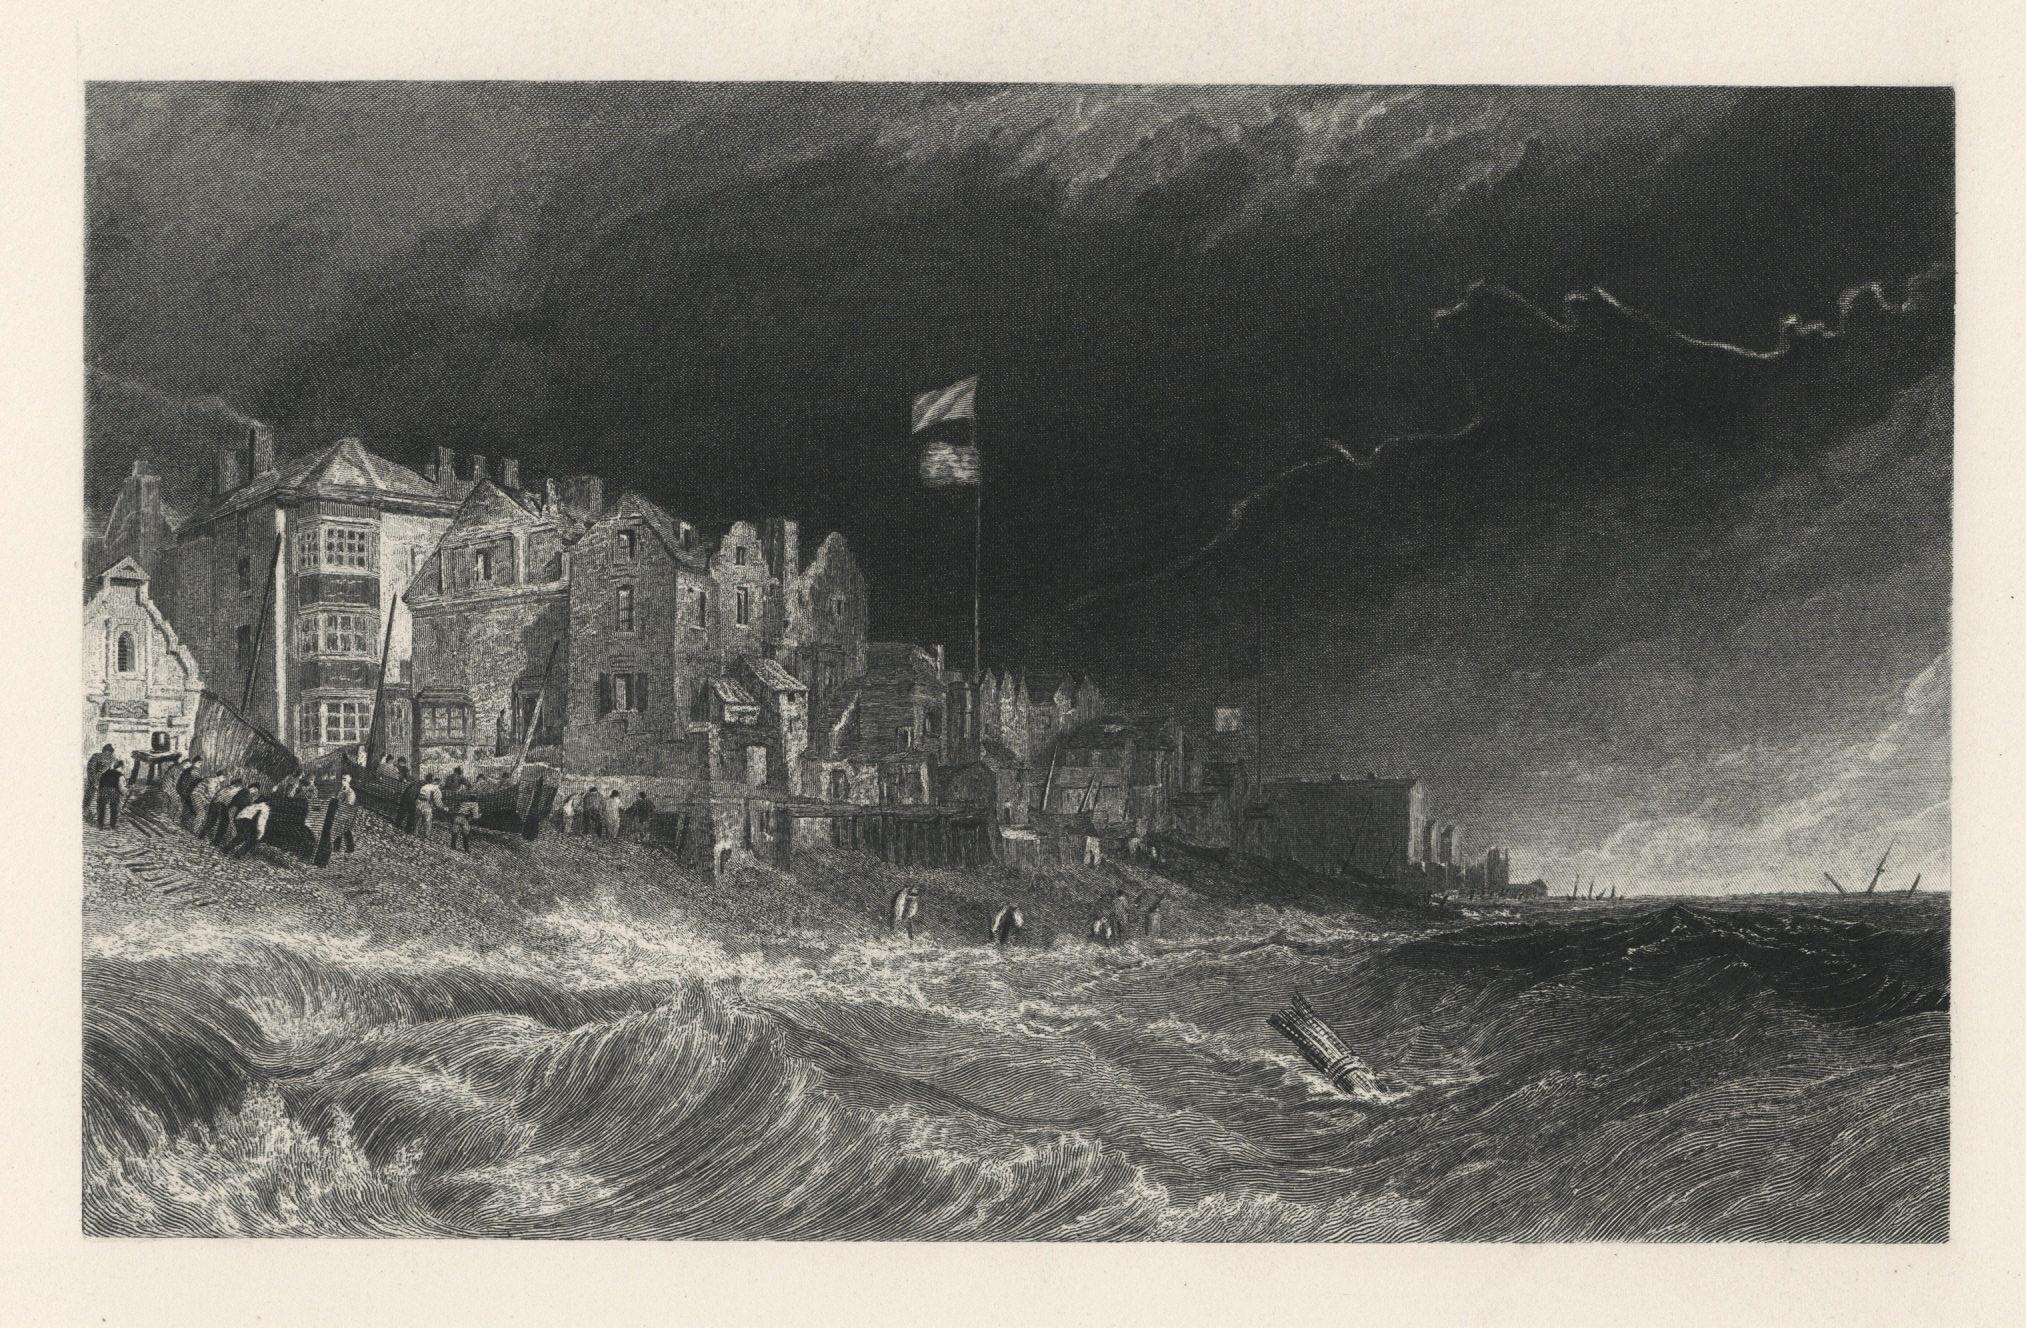 "Deal" engraving - Print by (After) Joseph Mallord William Turner